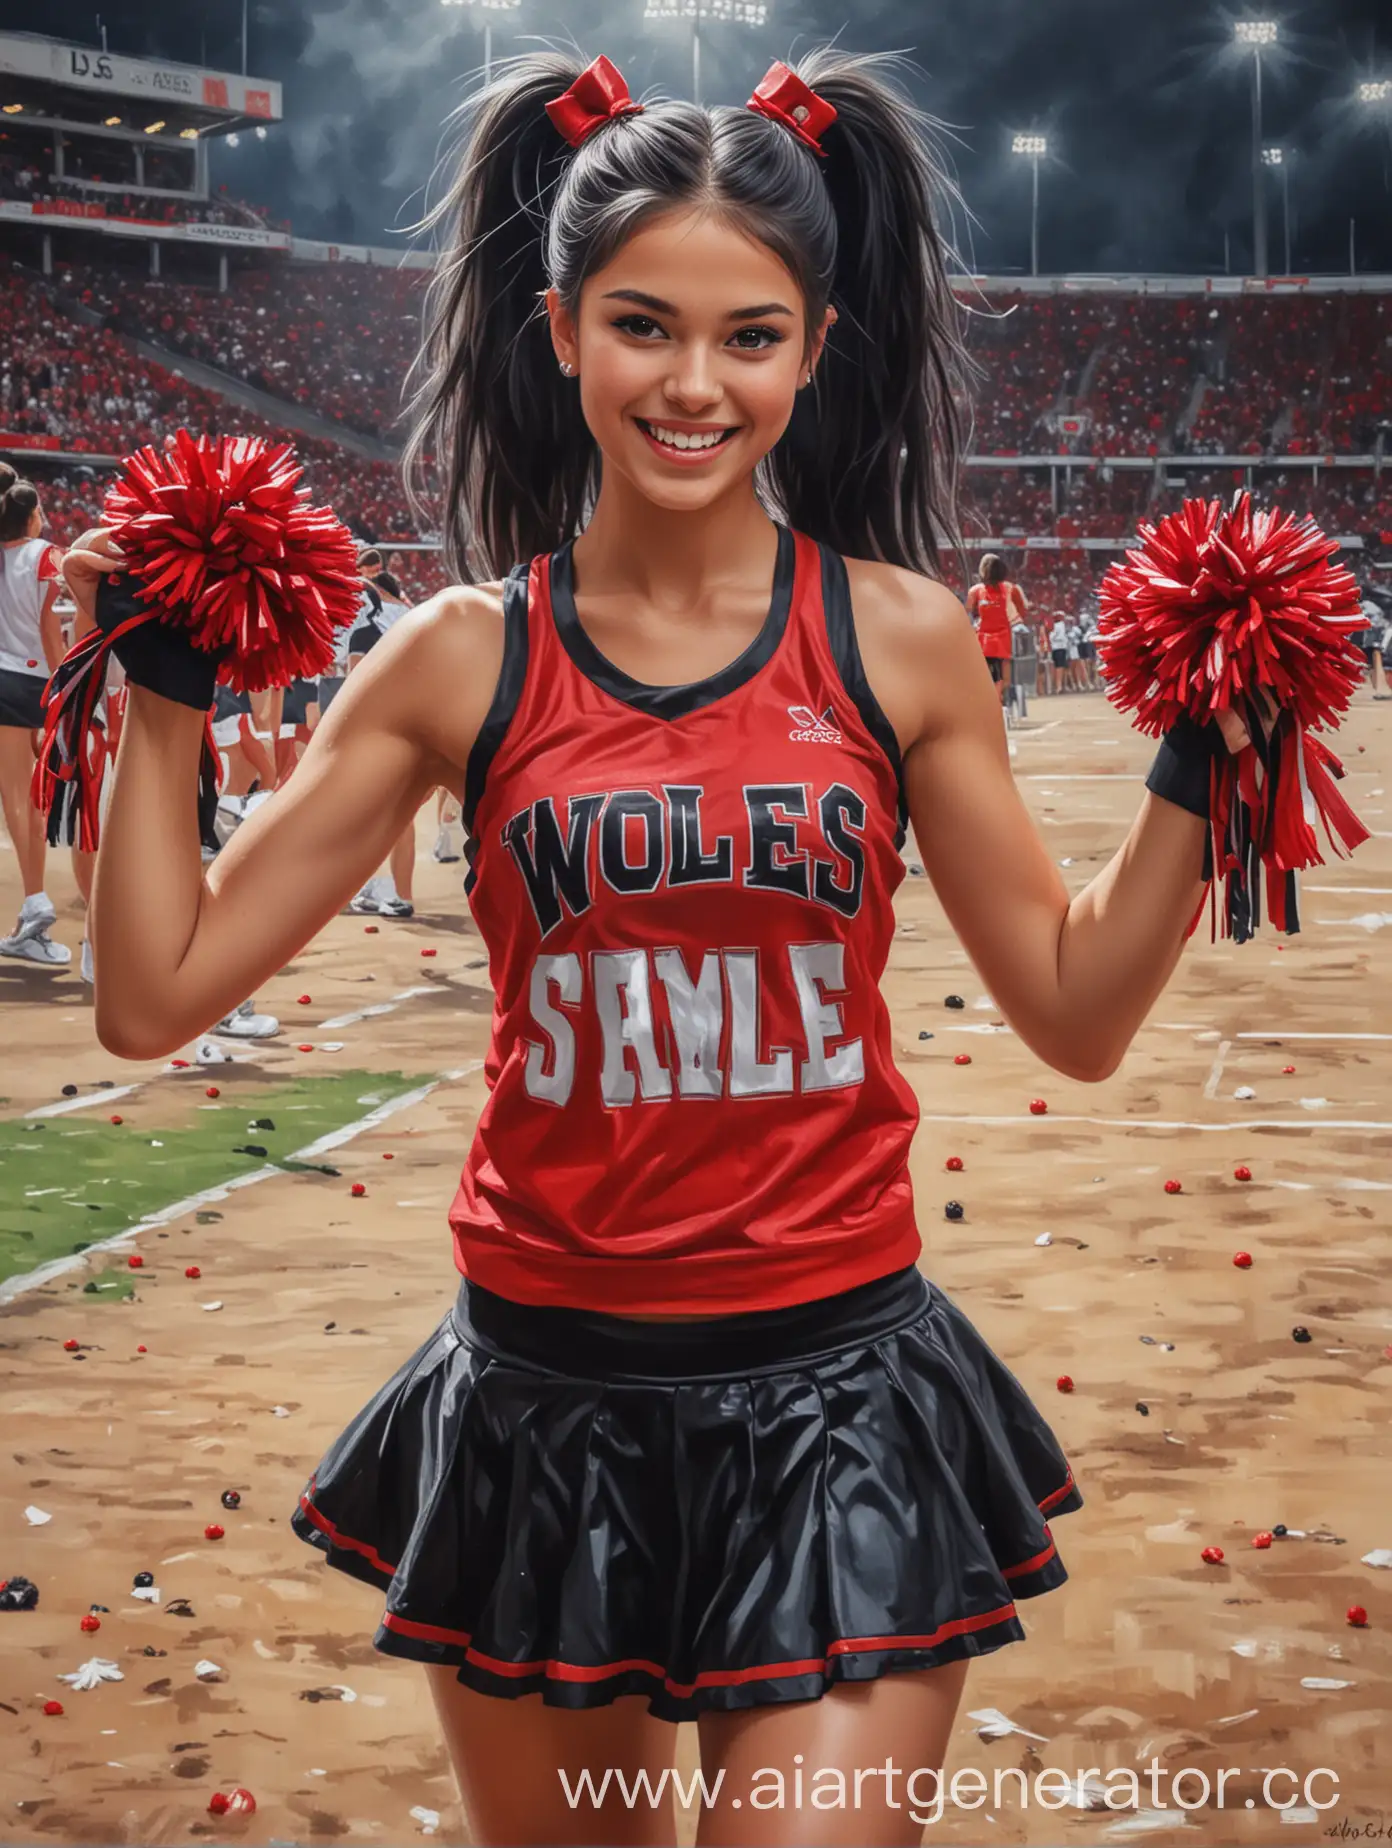 oil painting,young female cheerleader, dressed in a short top, skirt and sneakers, black and red colors in clothes, holding pom-poms in her hands,hyper-detailed, HDR 16k, long black hair gathered in a high ponytail, the inscription "Wolves" on the top, smile, stadium